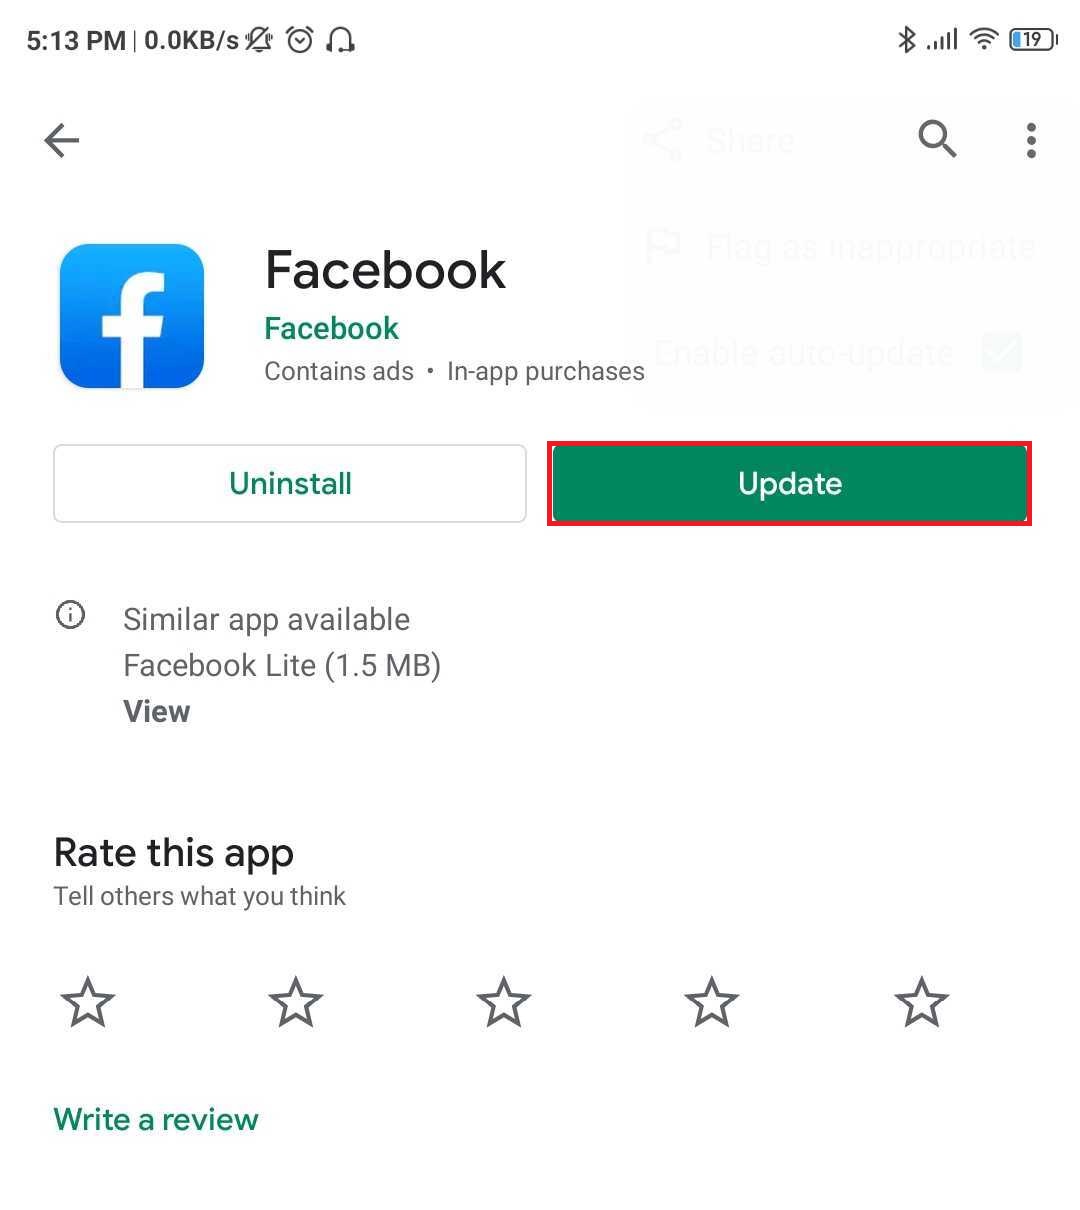 update your Facebook application from the Play Store.